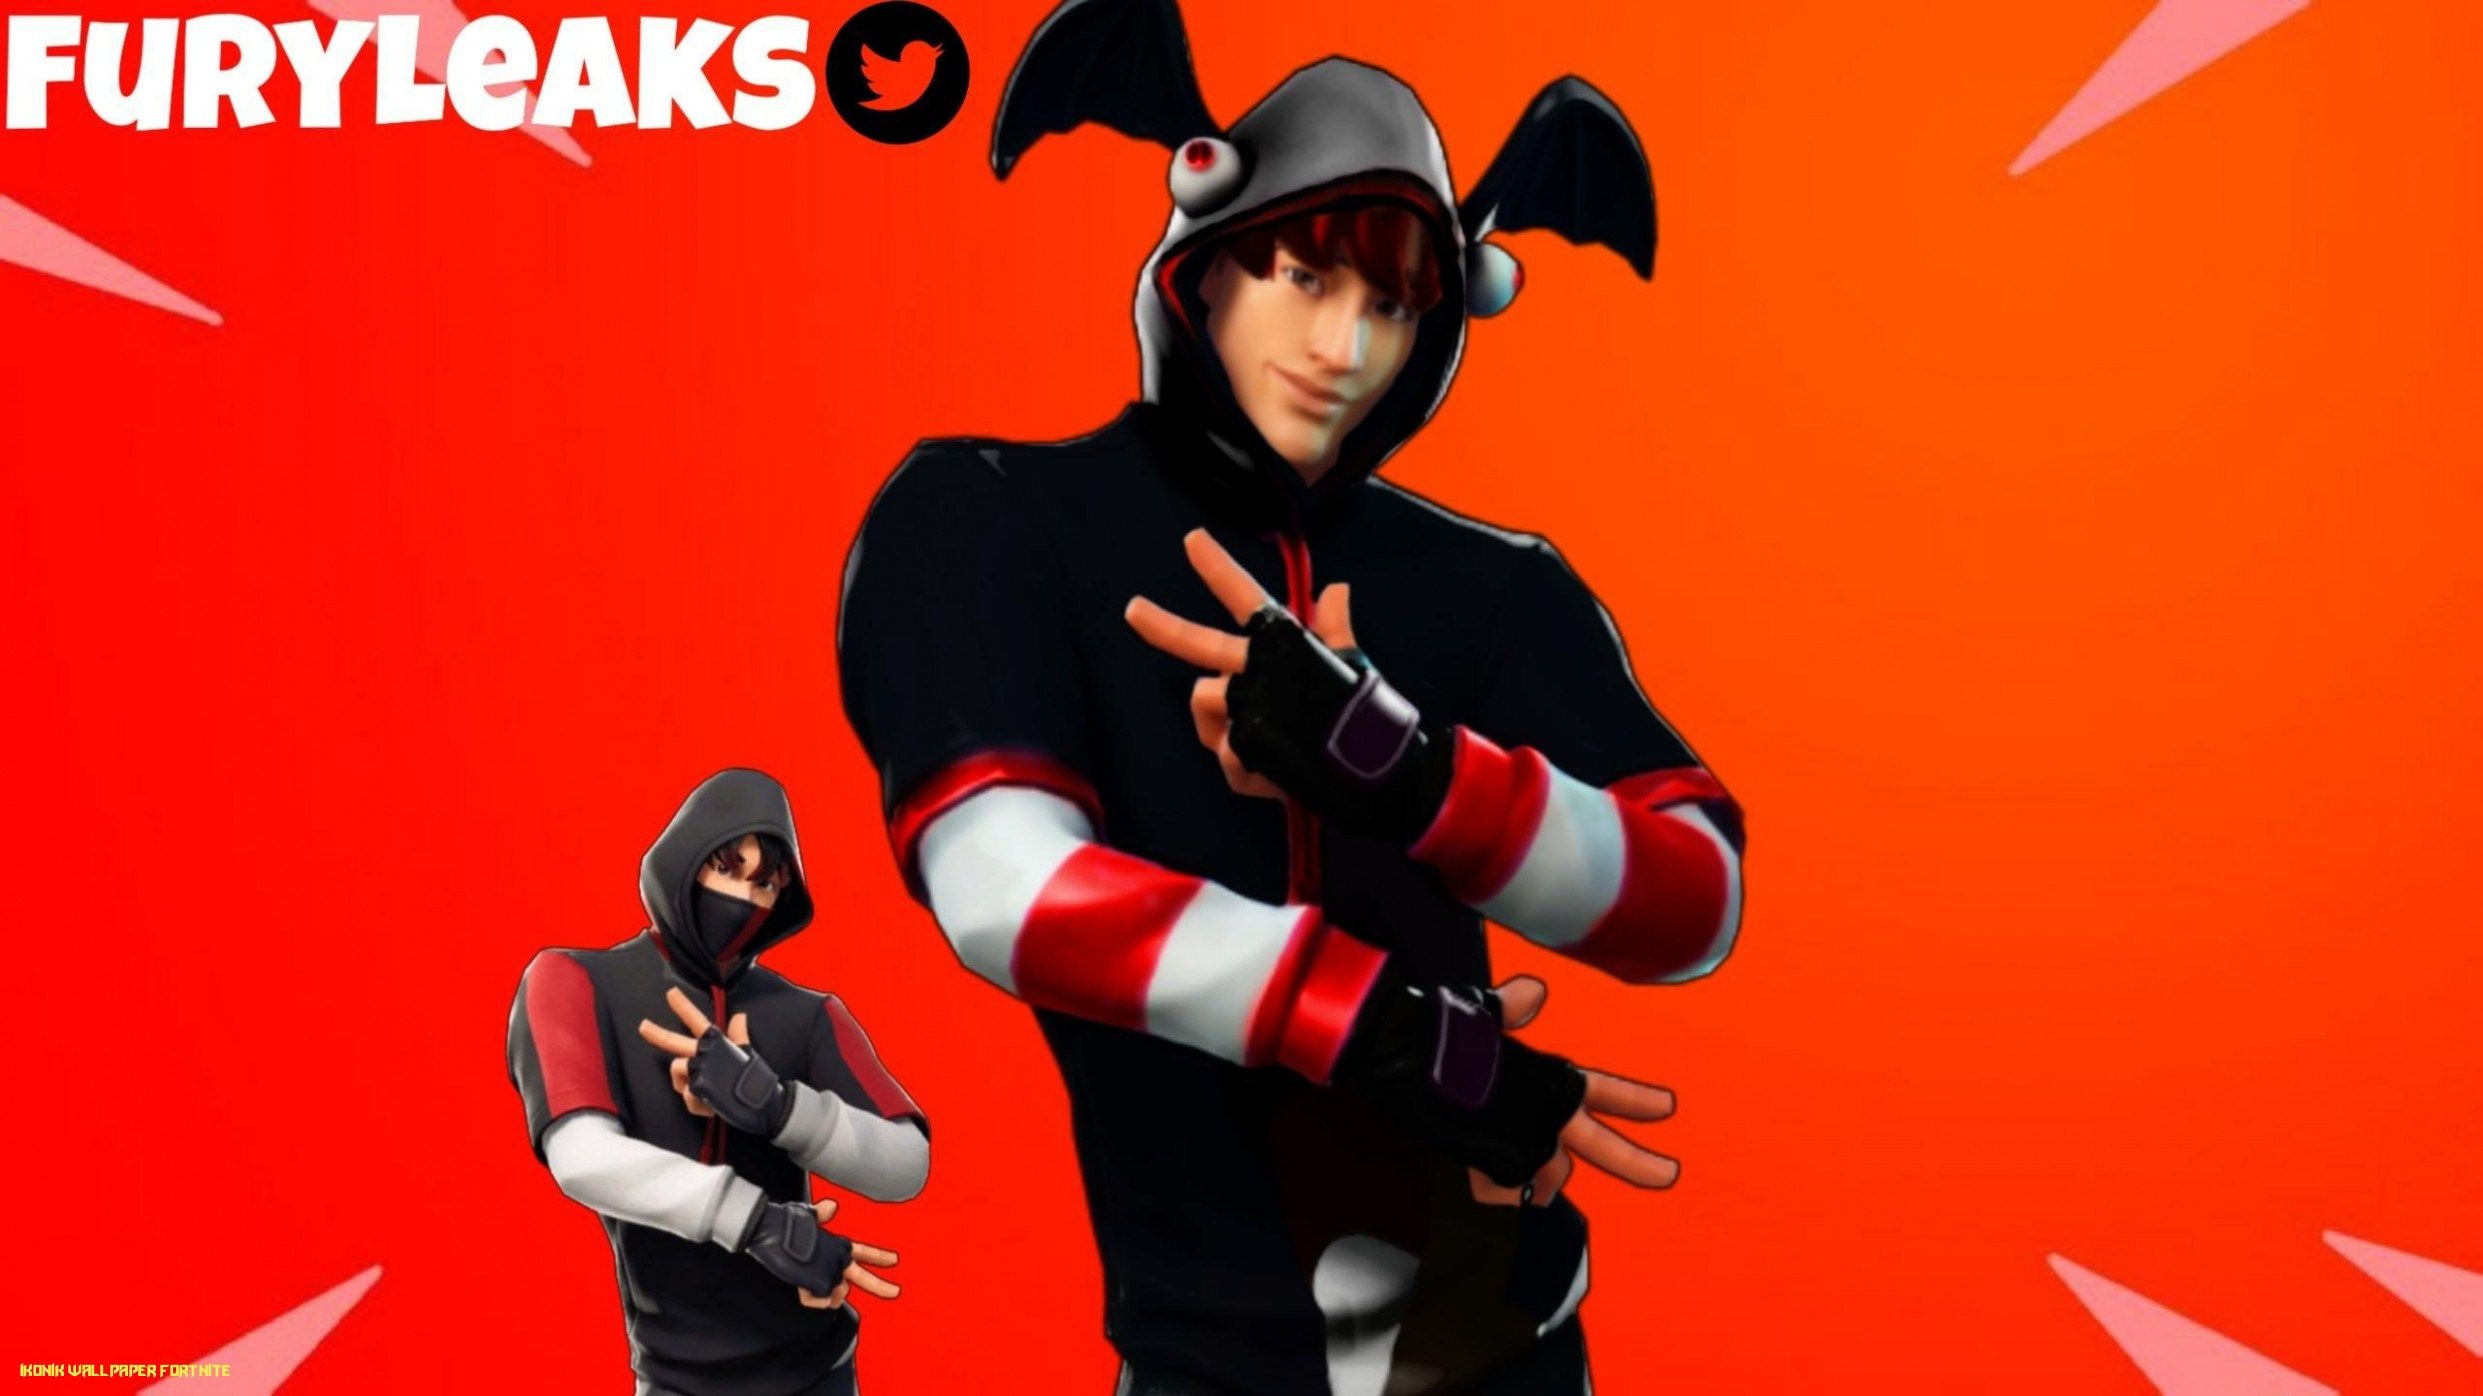 Ikonik With Ruby Wallpapers Wallpaper Cave